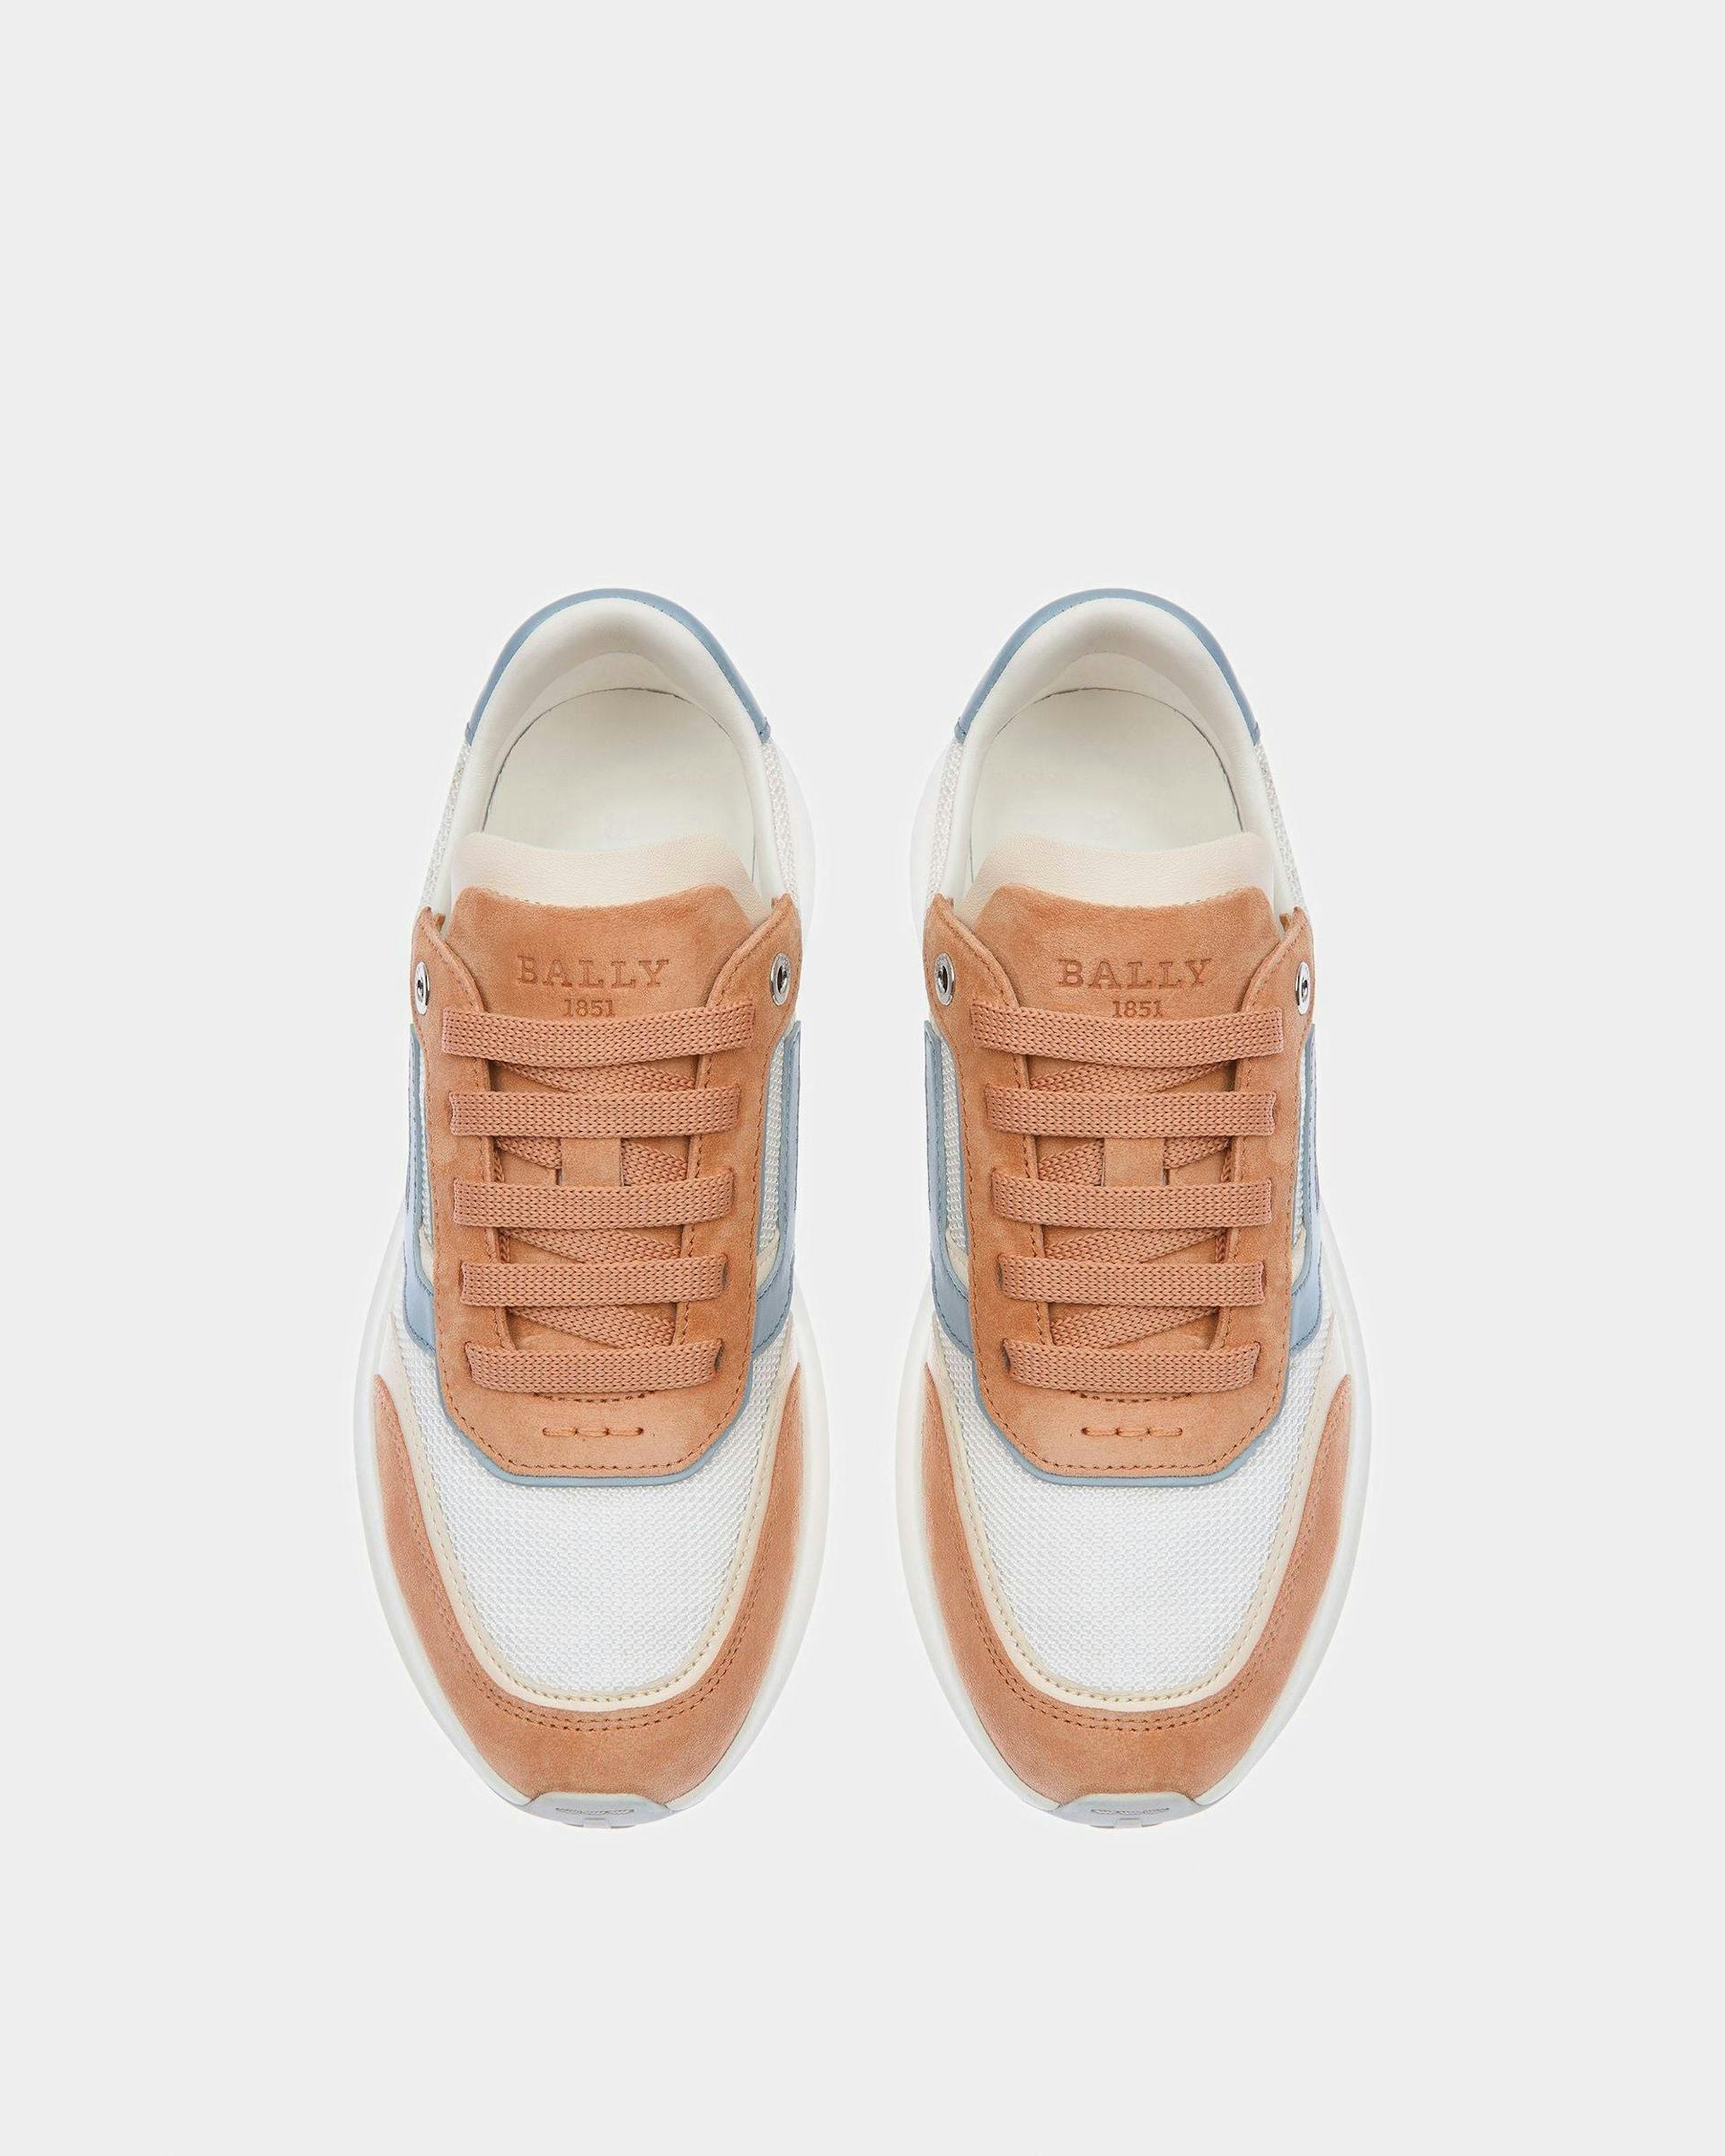 Demmy Leather And Fabric Sneakers In Peach - Women's - Bally - 02